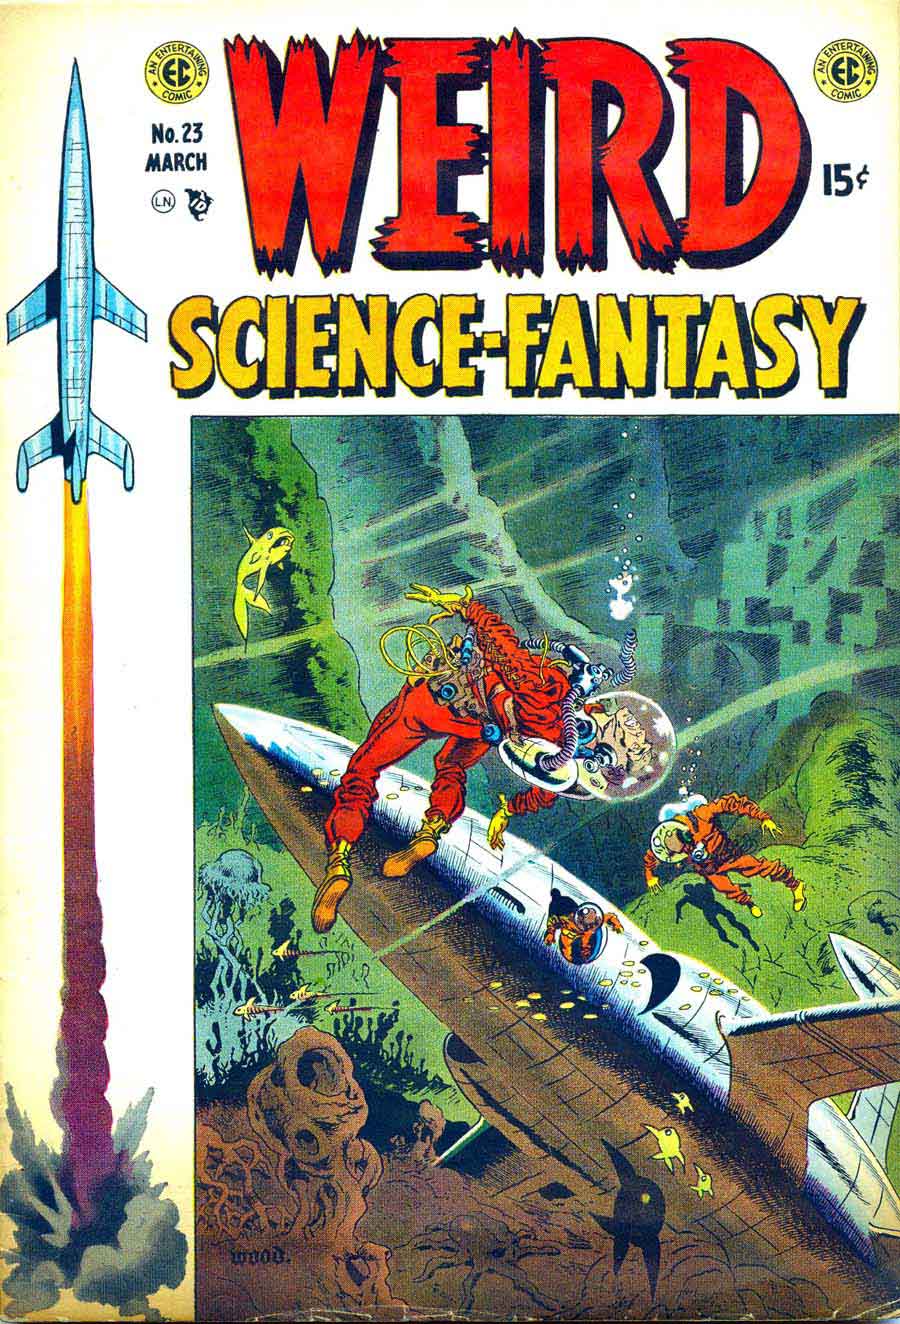 Weird Science-Fantasy v1 #23 ec comic book cover art by Wally Wood